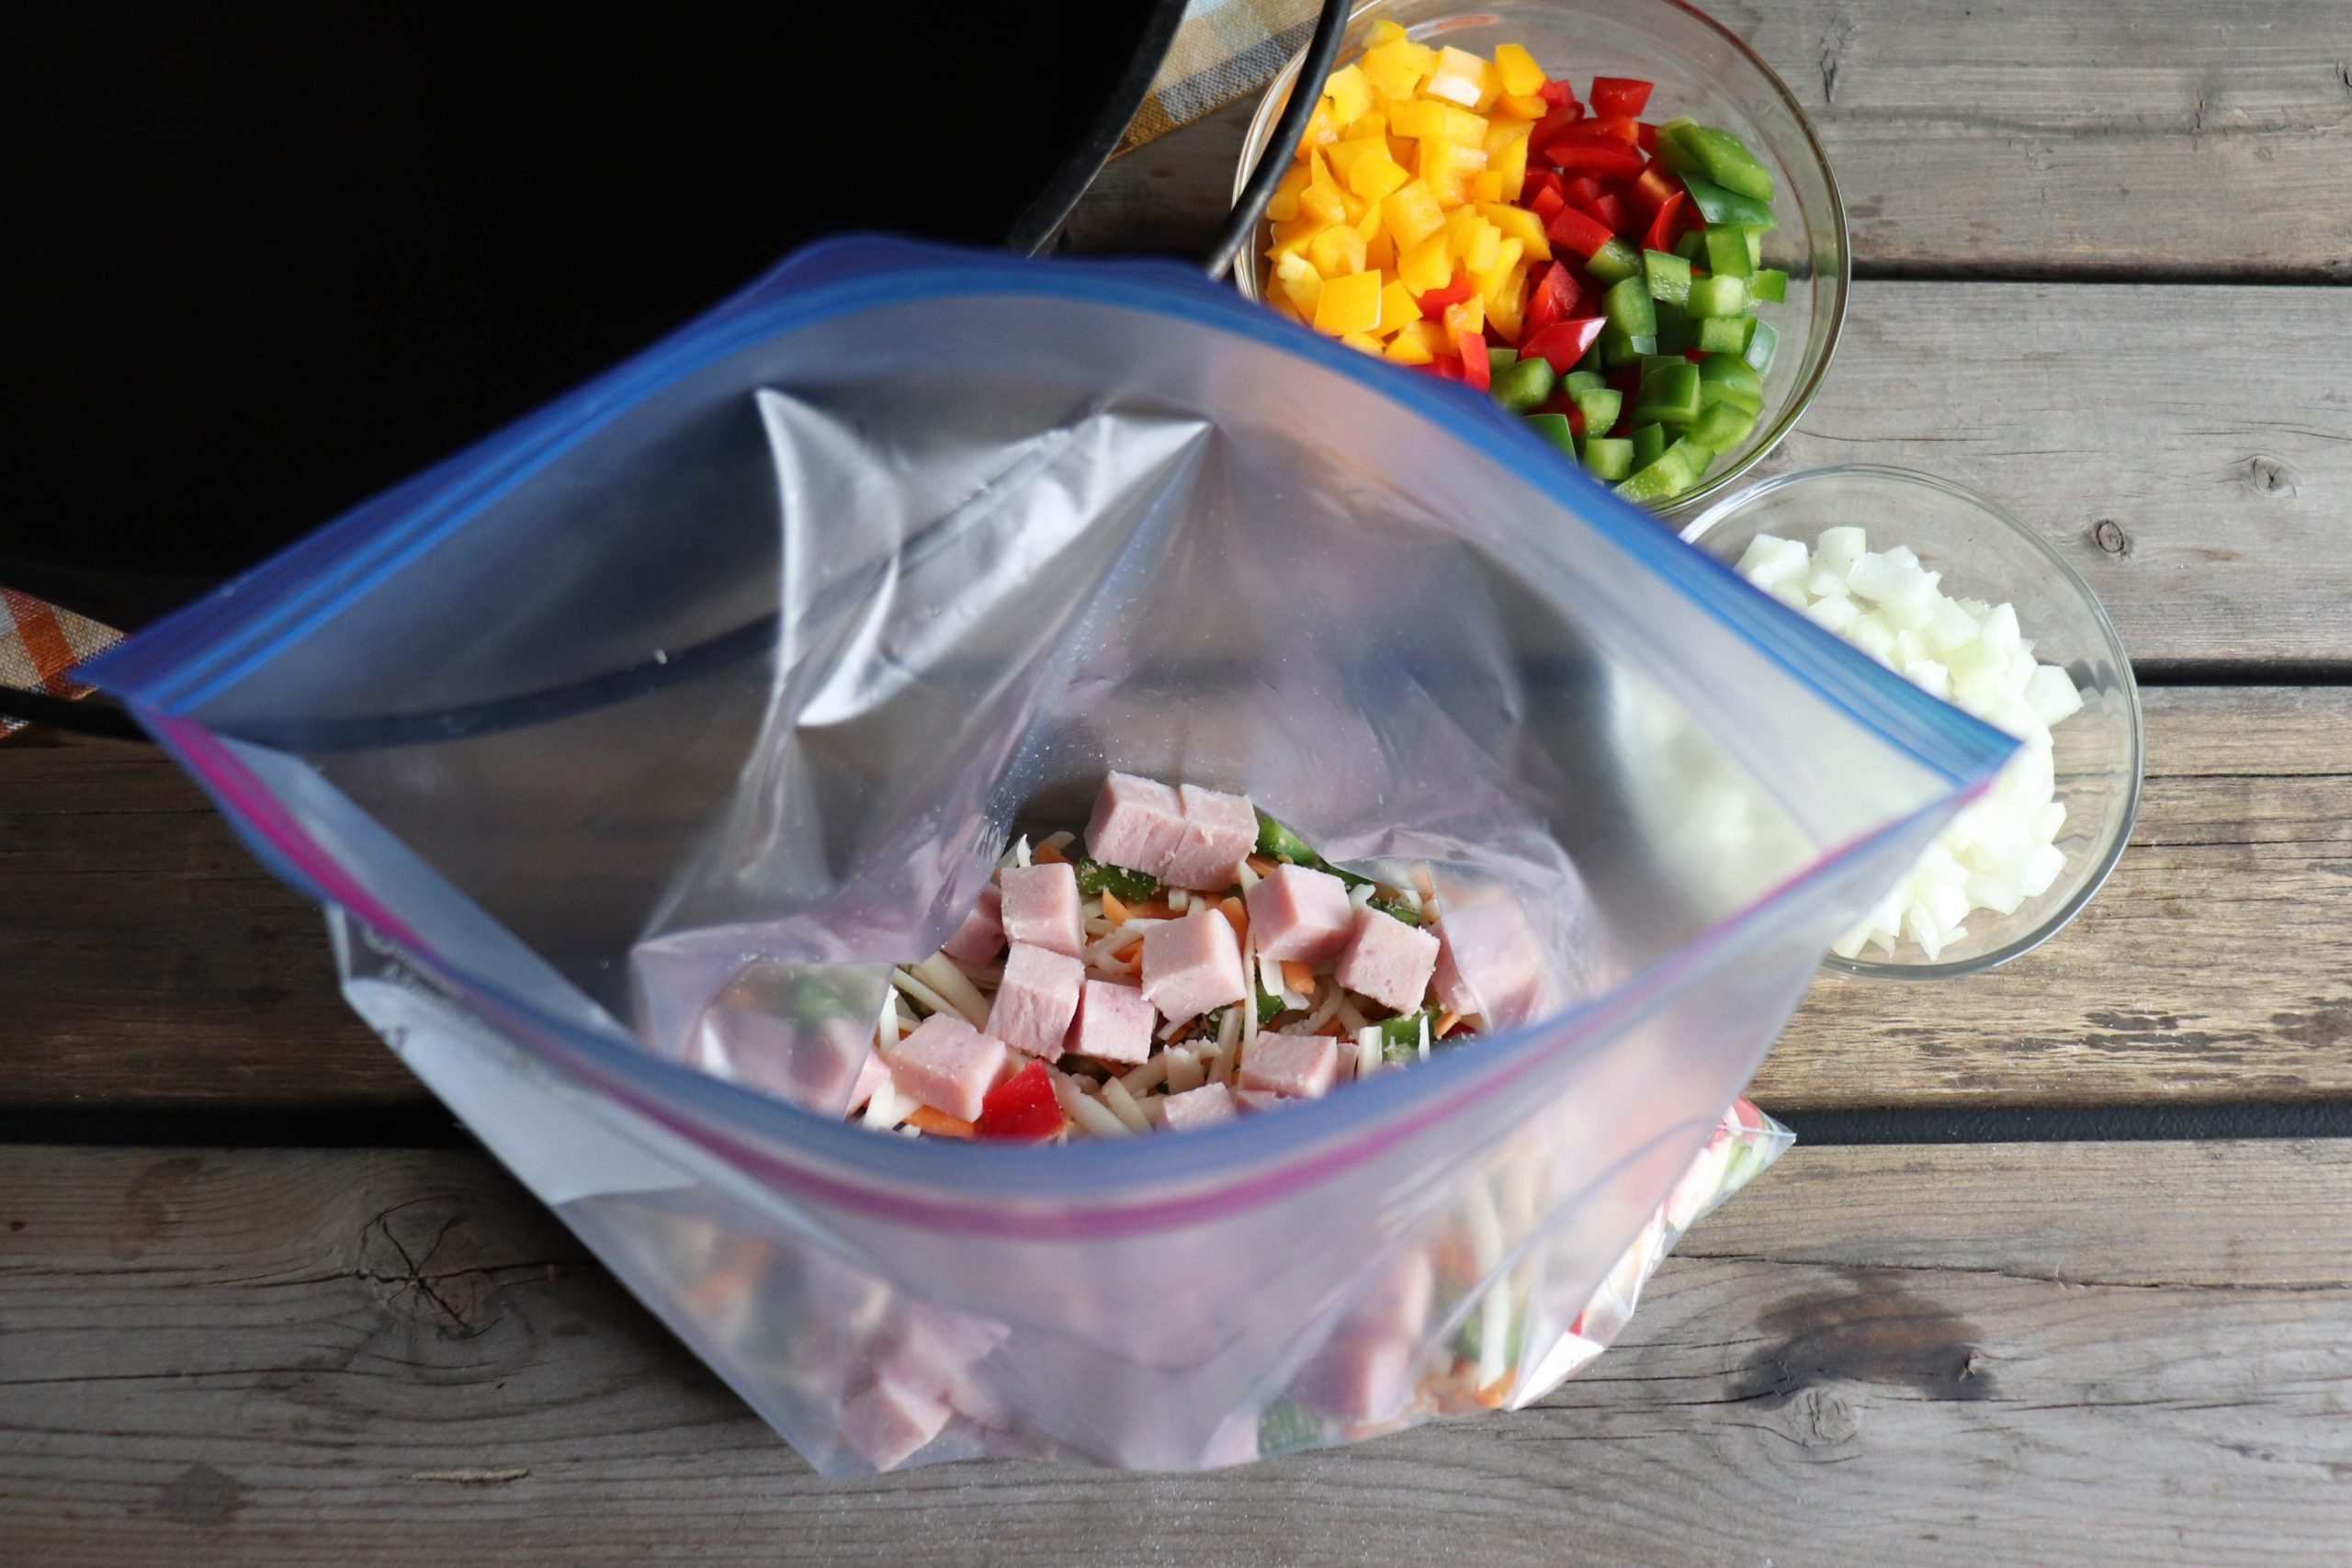 The Best Camping Food Storage Ideas » Campfire Foodie